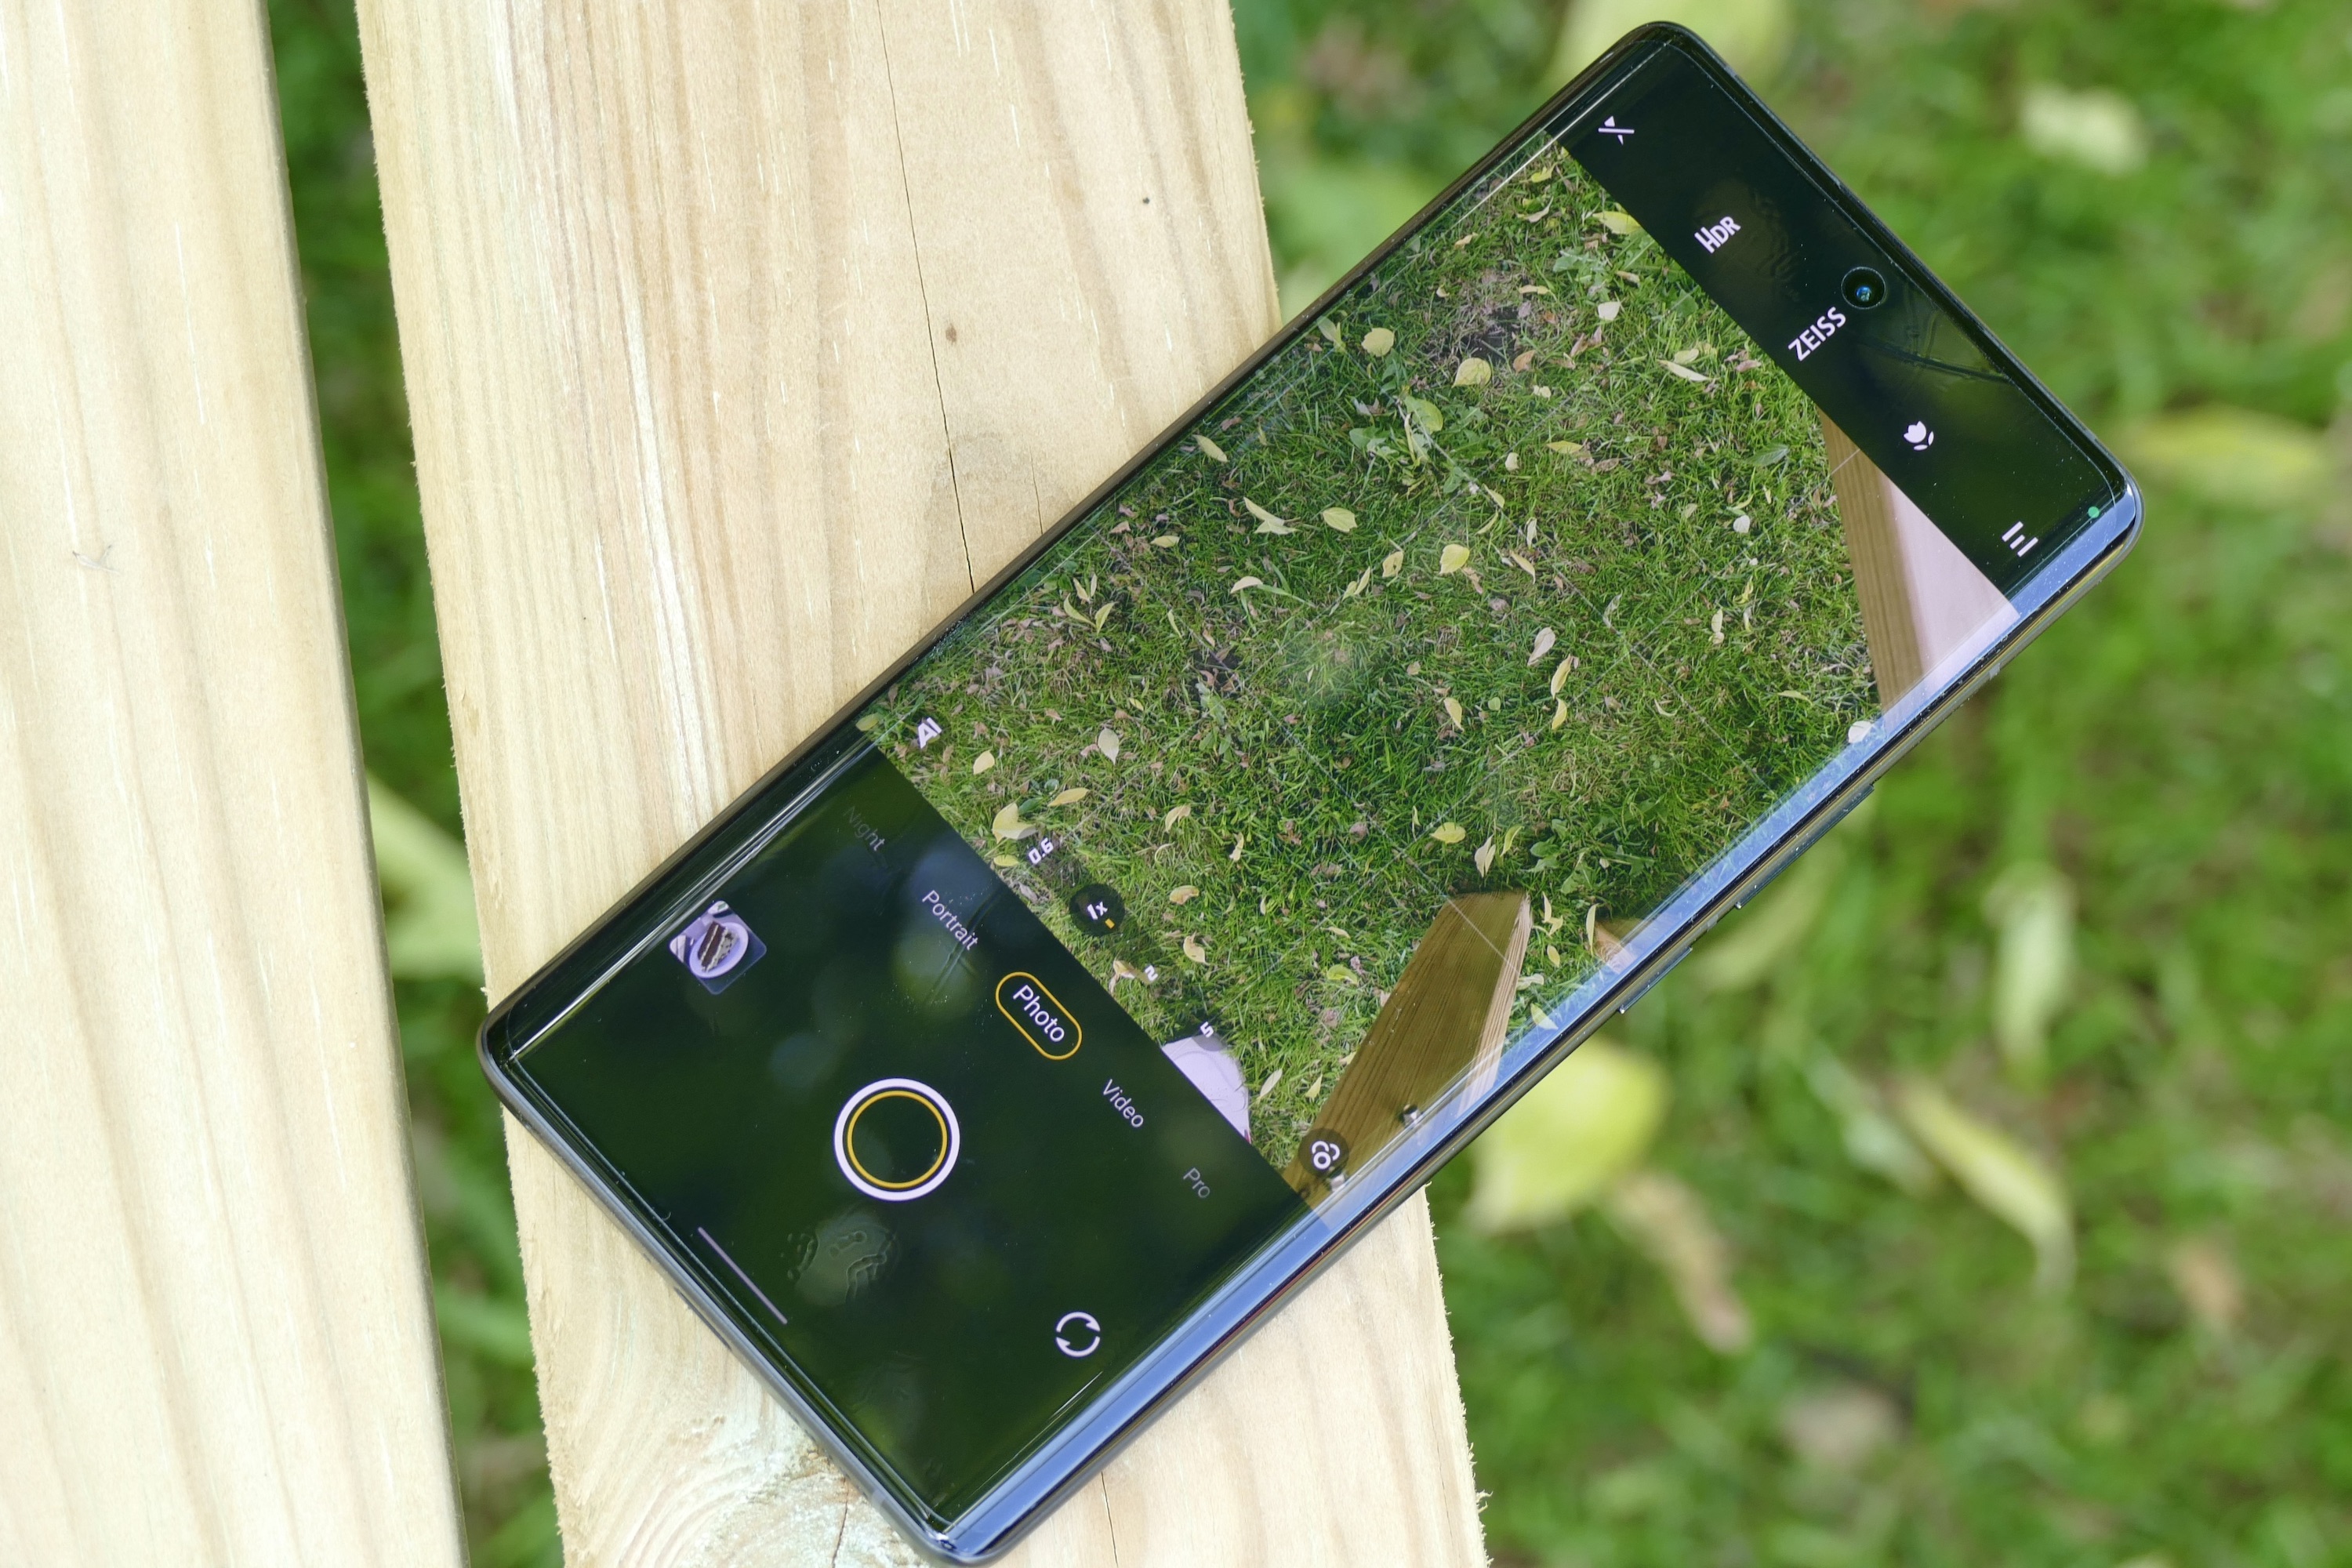 Video: Putting the Vivo X80 Pro to the Test